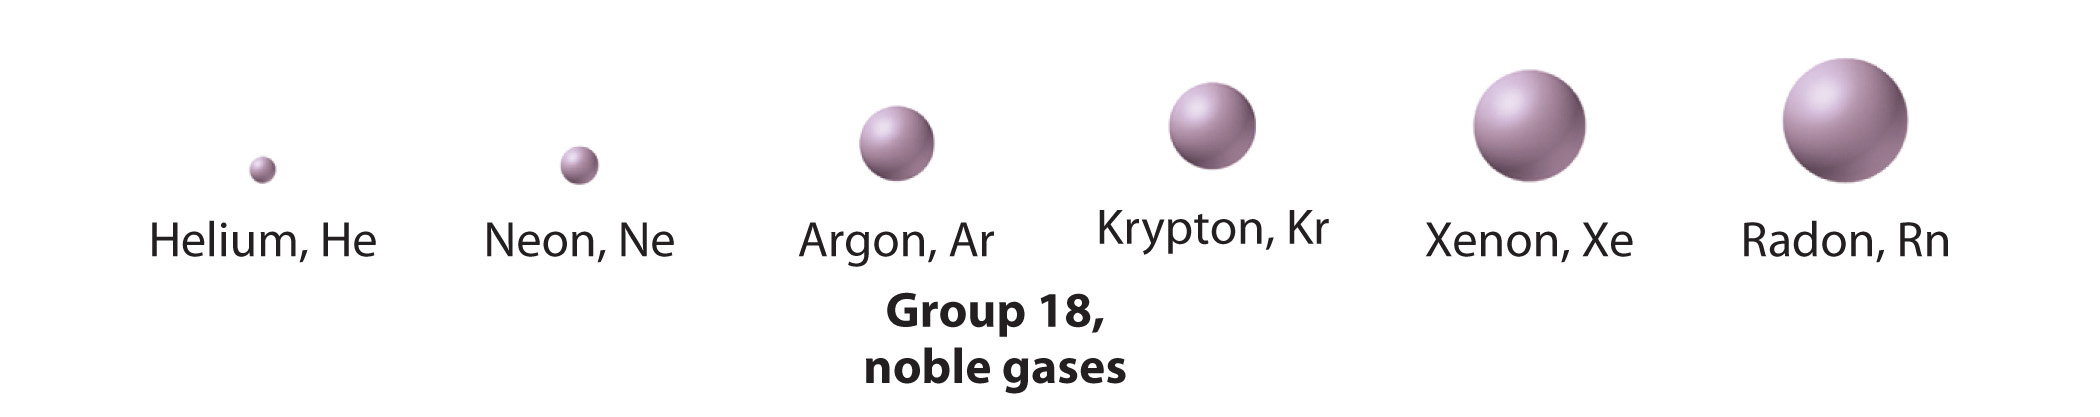 The elements of group 18, the noble gases, are shown.